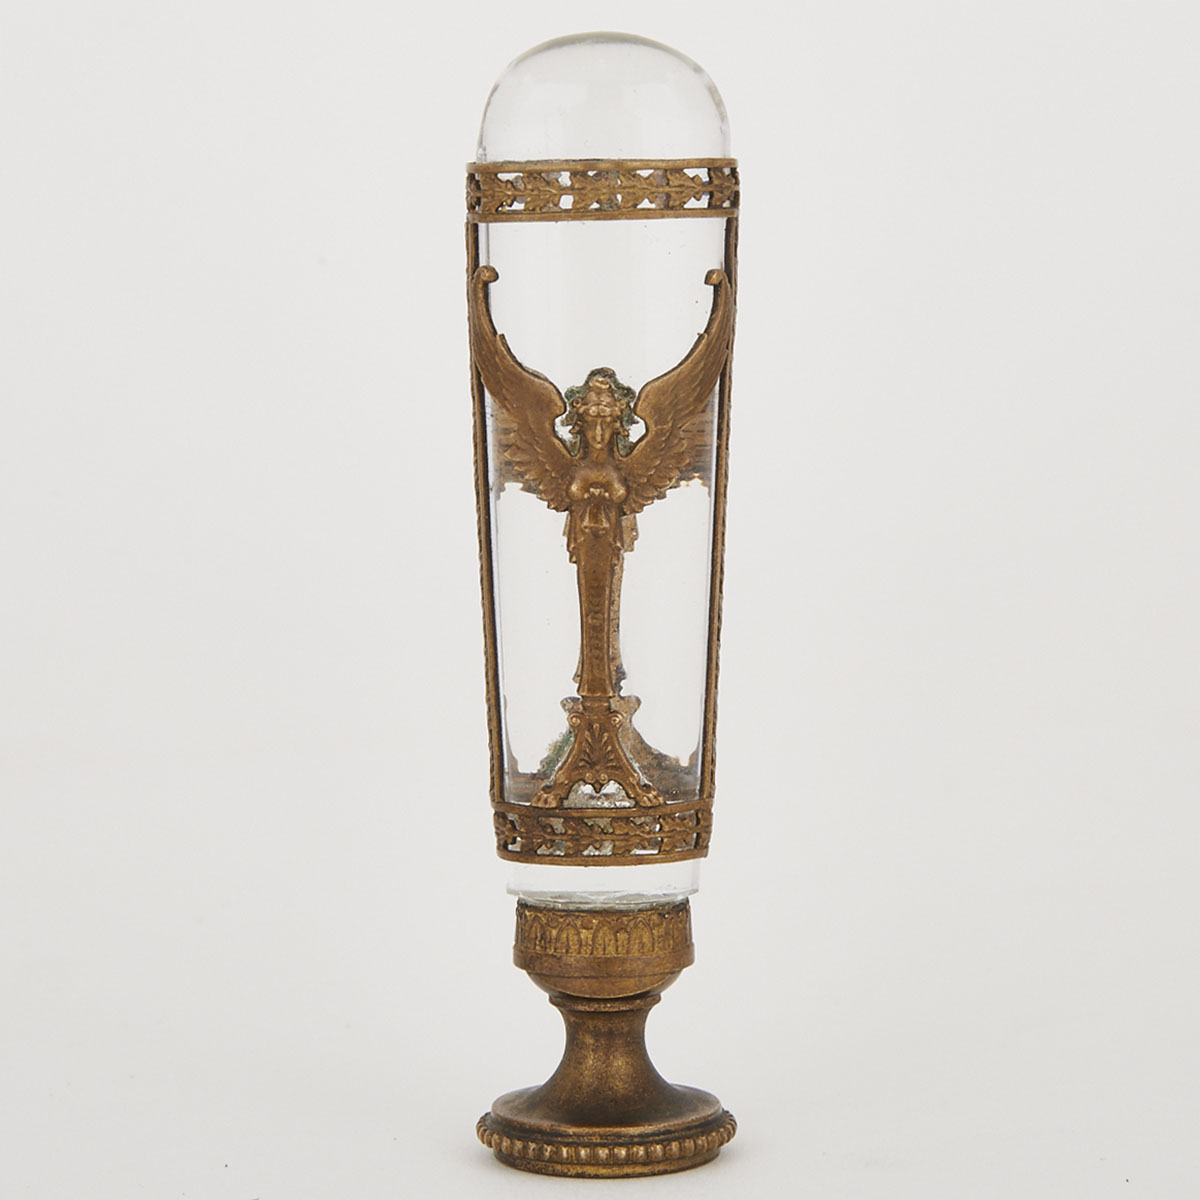 Polished Glass and Gilt Bronze Desk Seal, 19th/20th century